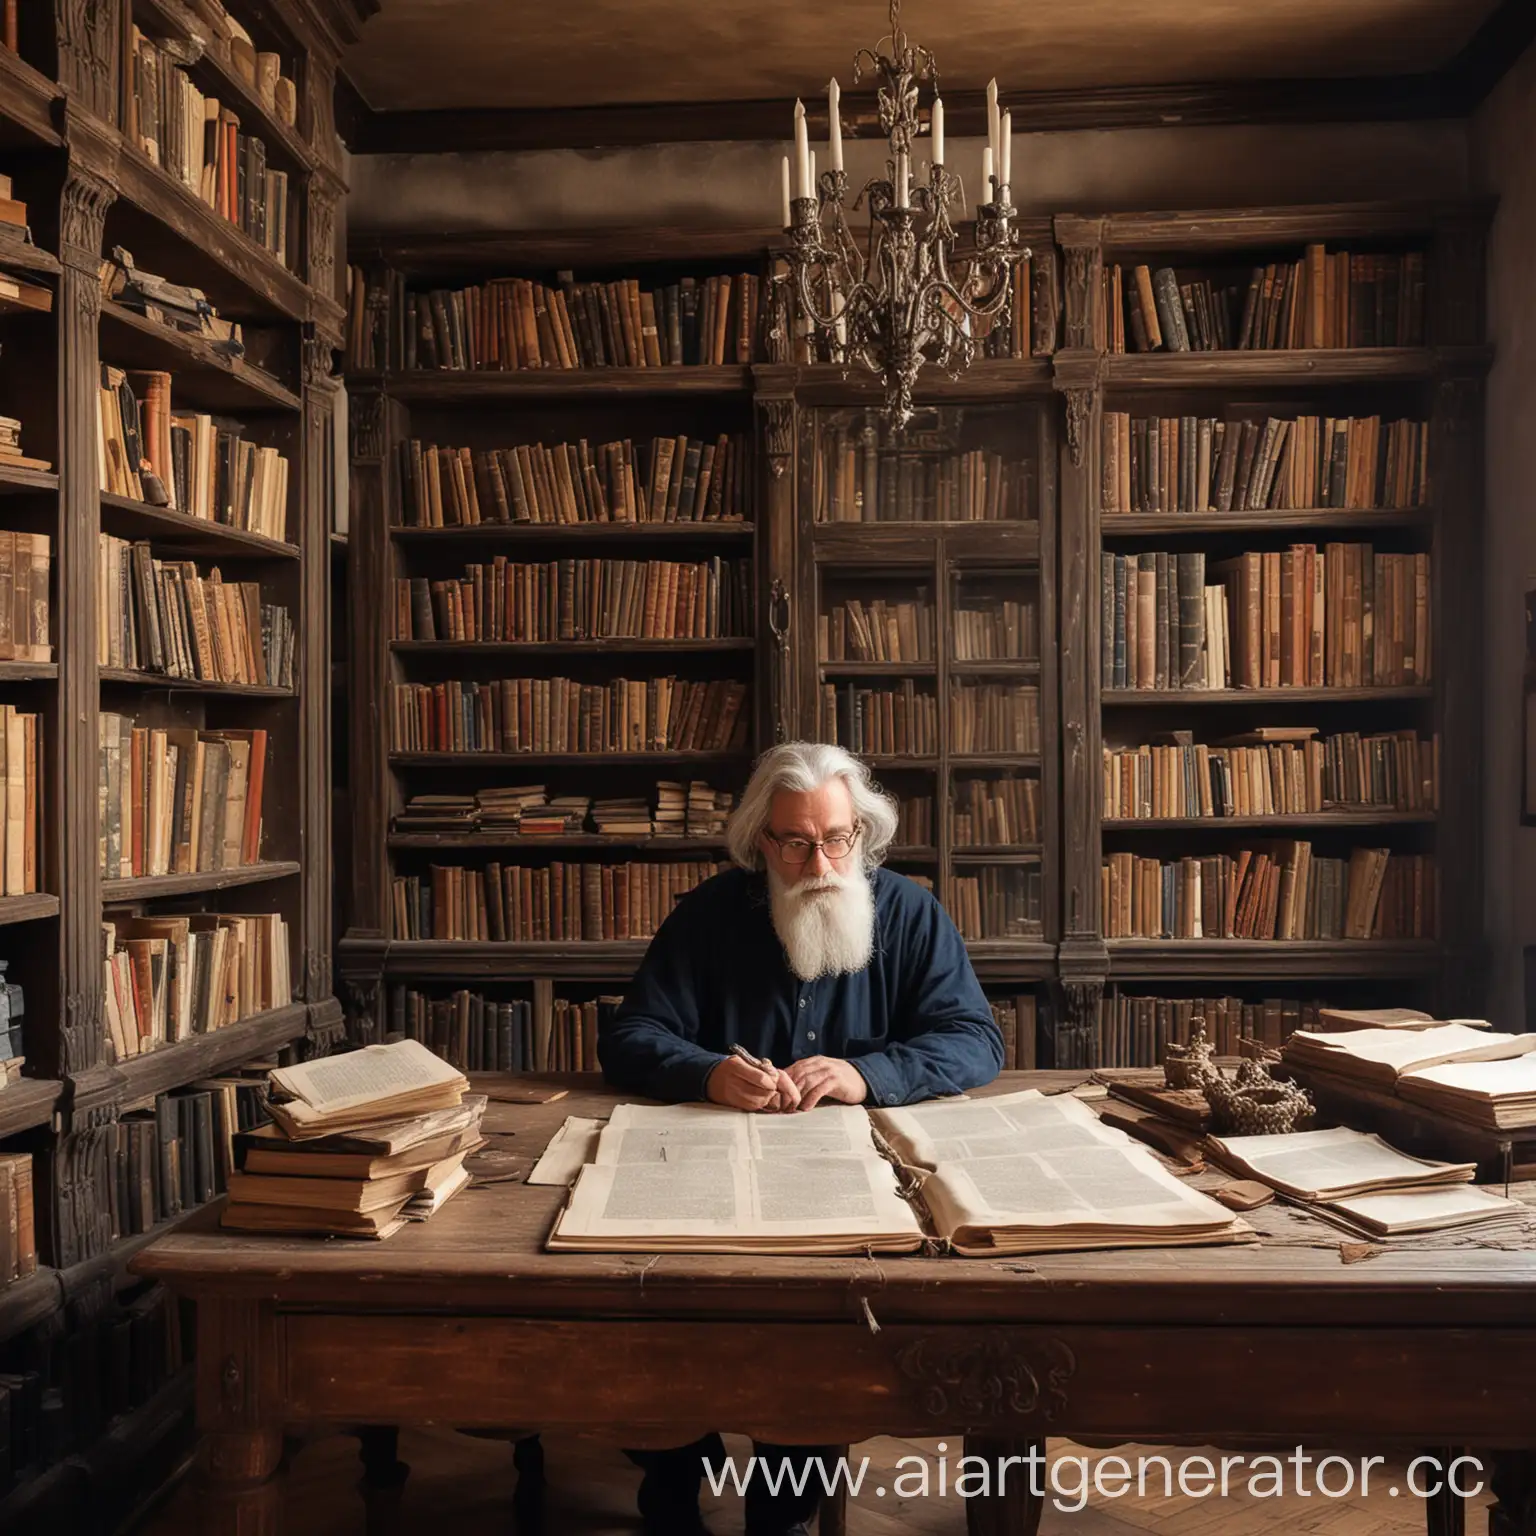 Old-Castle-Cabinet-with-Man-Reading-Parchment-at-Big-Table